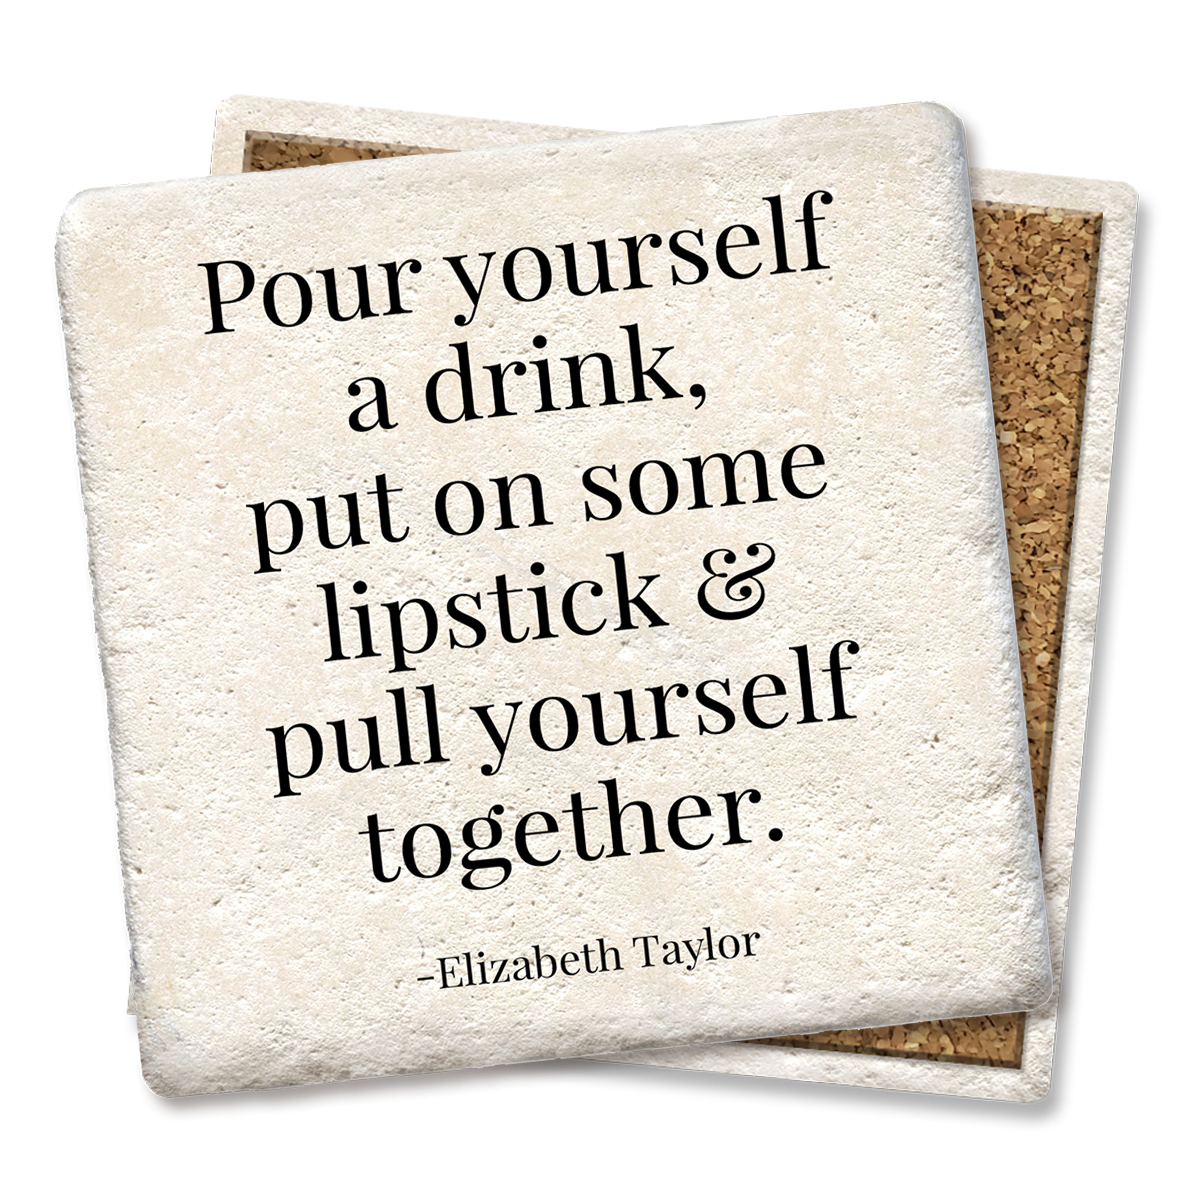 Pour Yourself a Drink Coaster